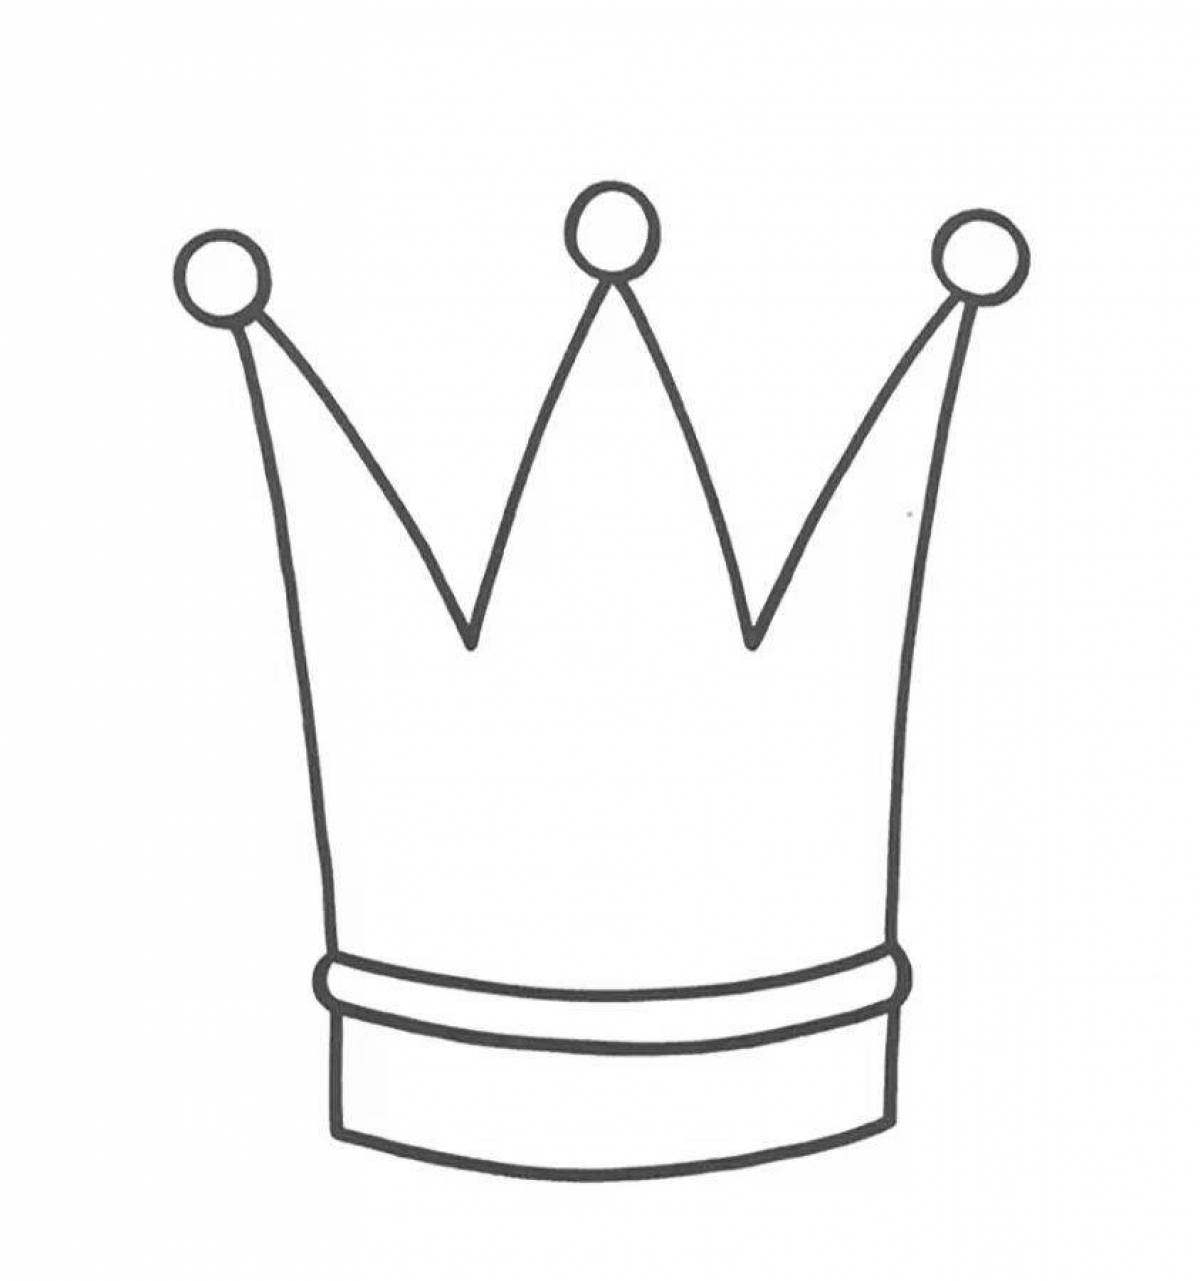 Awesome crown coloring page for kids